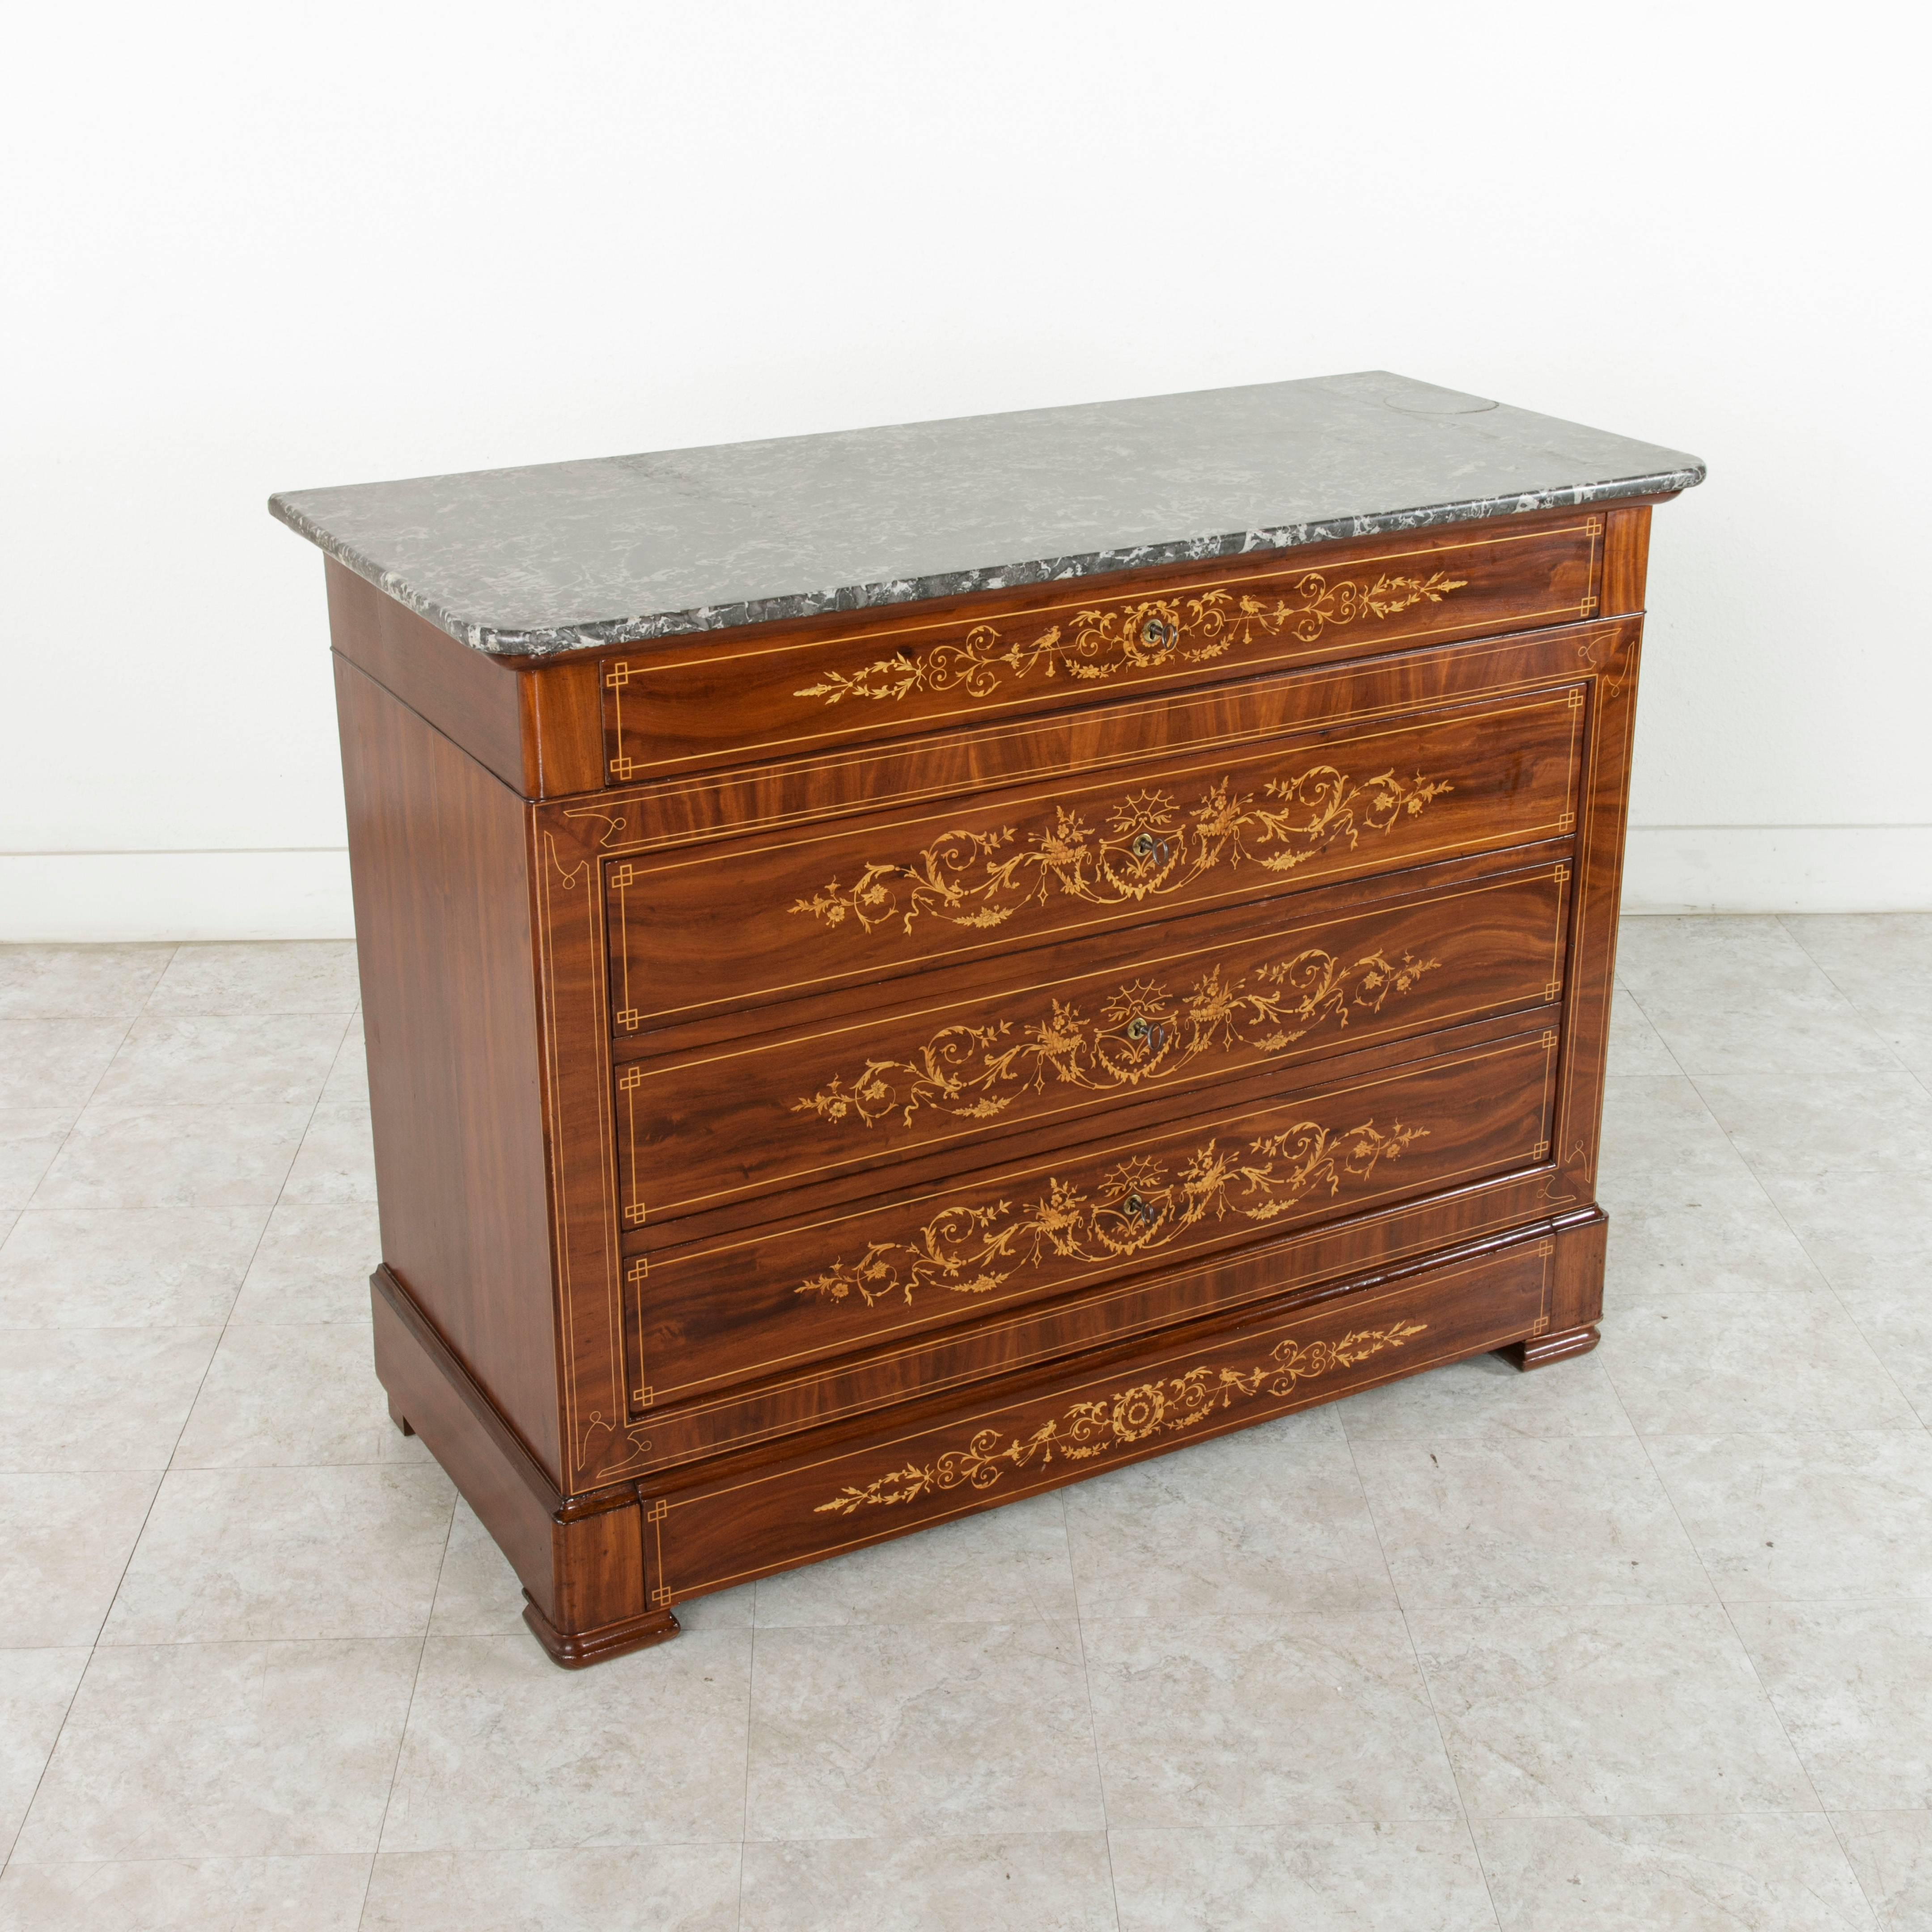 A rare piece from a short period of time in French furniture making, this Charles X period mahogany marquetry chest features finely inlaid lemon wood outlining the facade and each drawer front of the piece. Intricately scrolled leaves in lemon wood